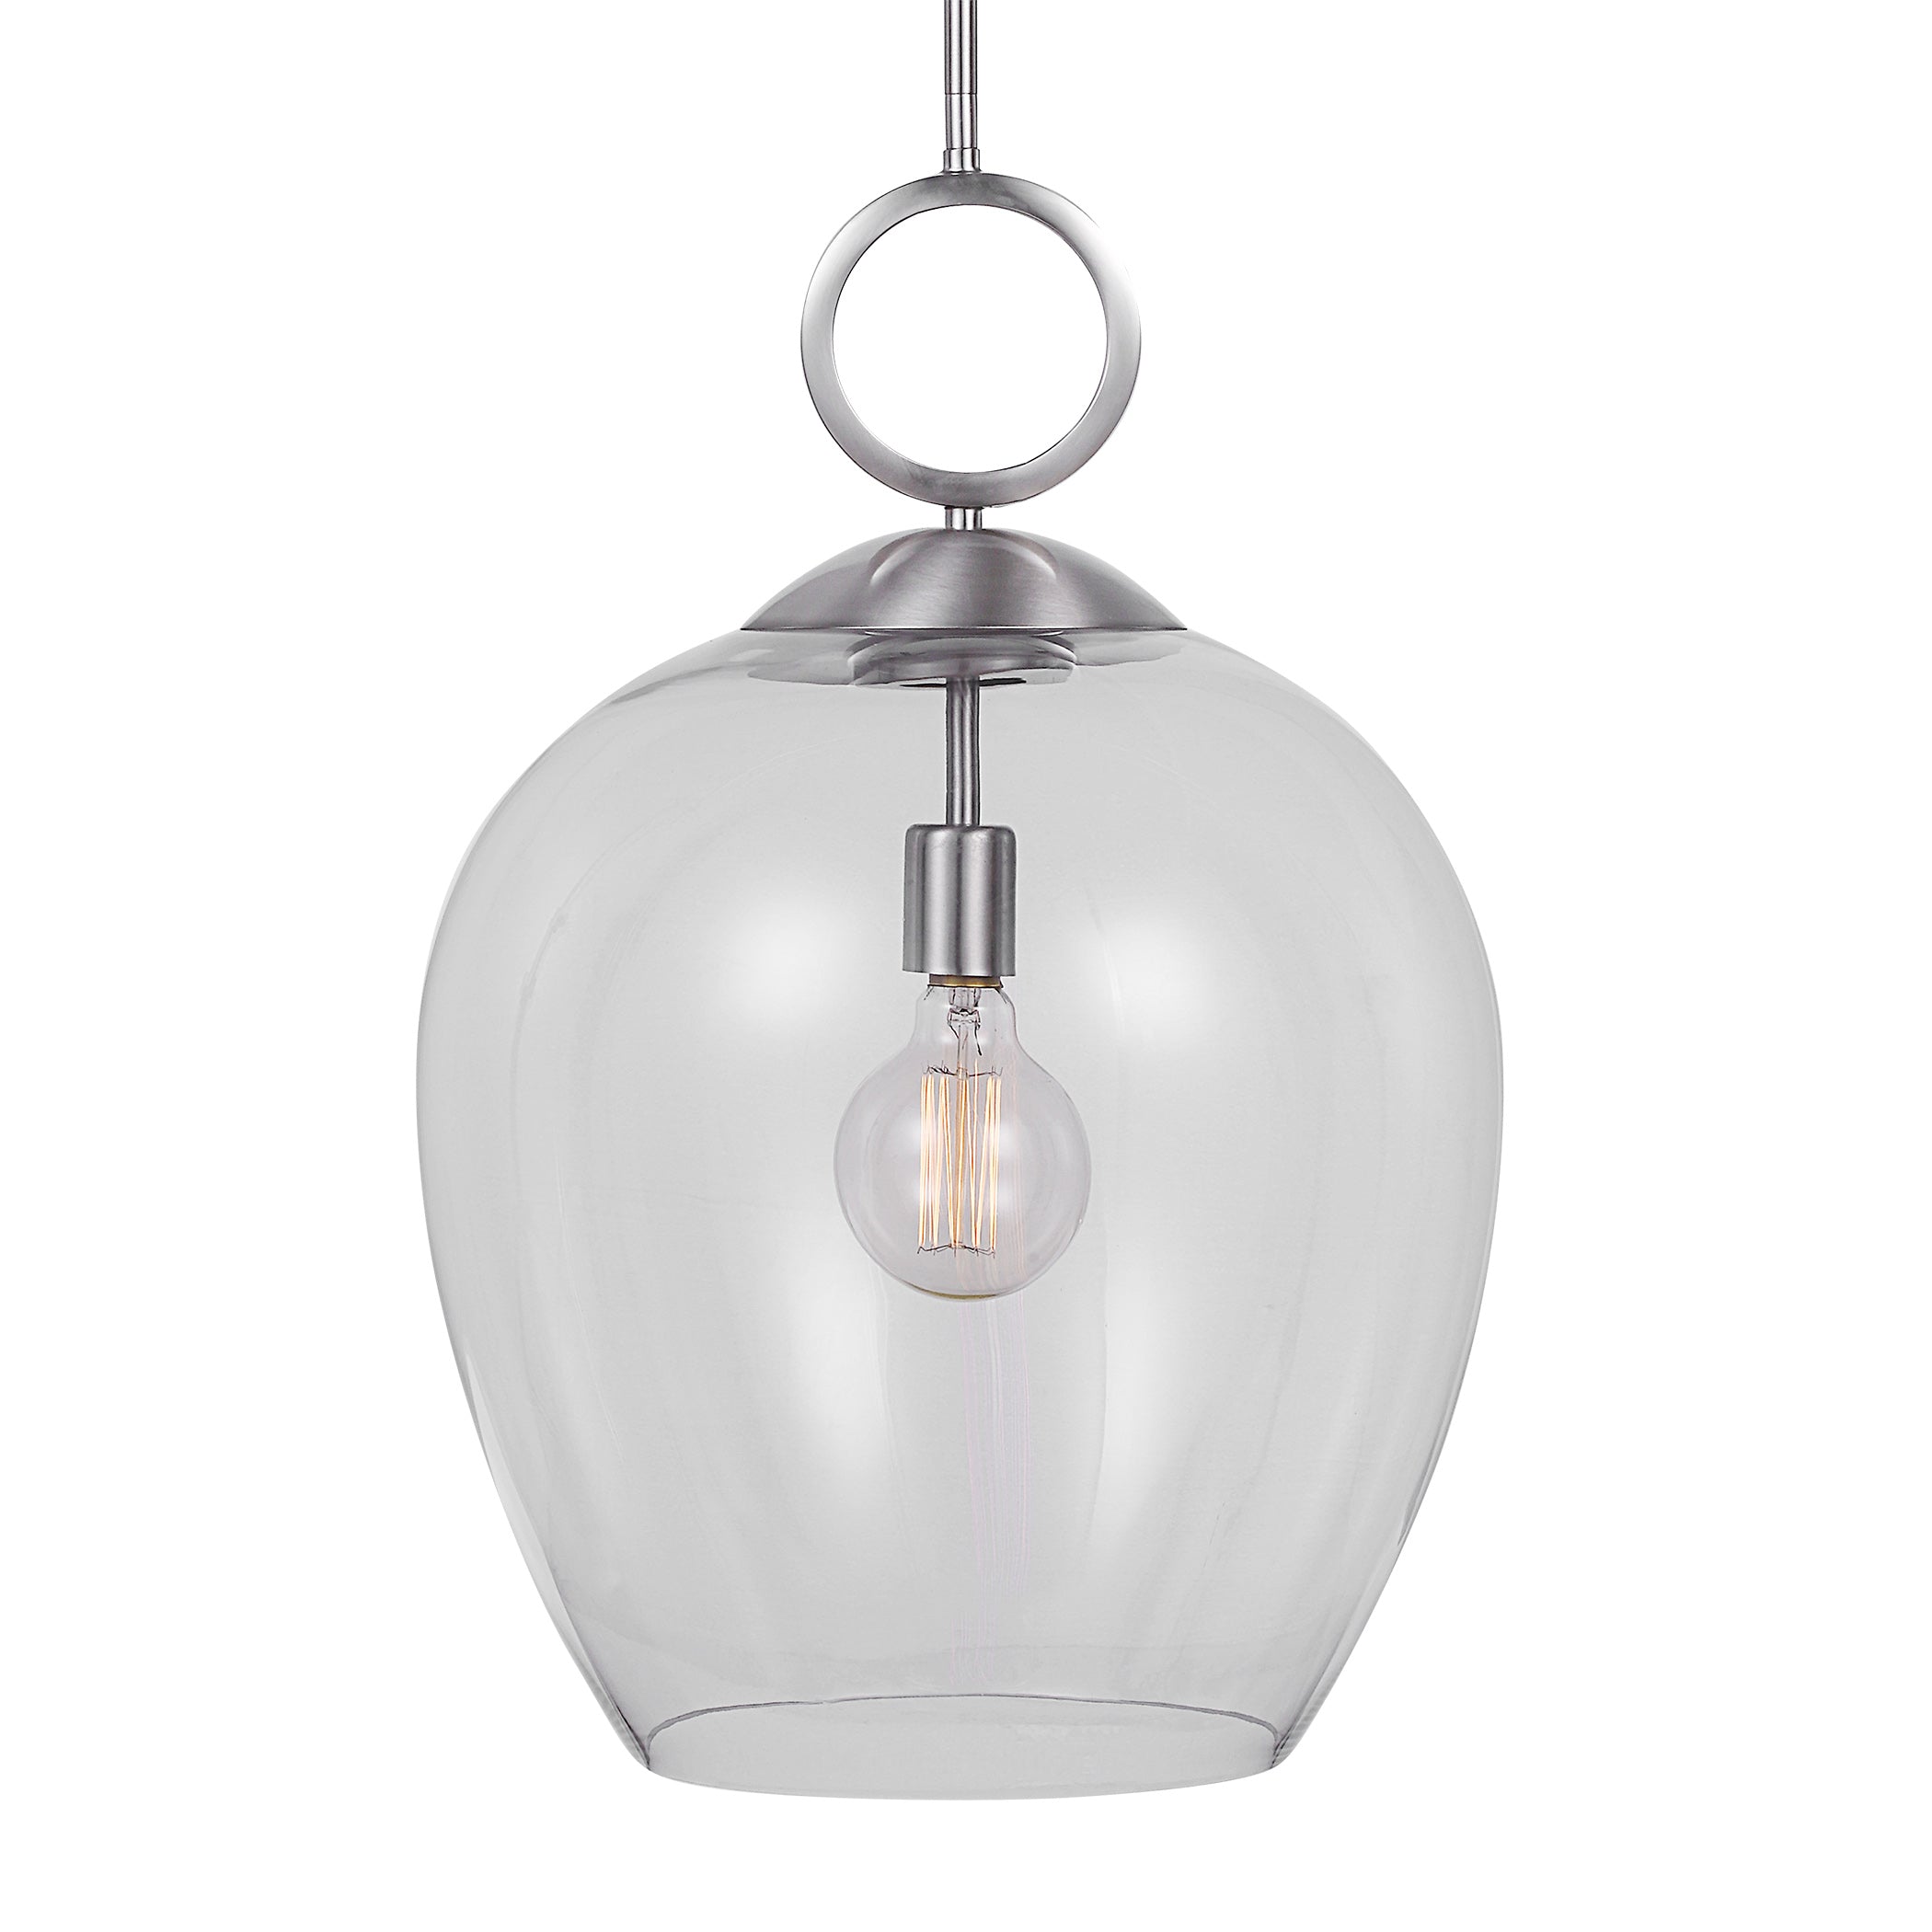 the-official-site-of-official-uttermost-22169-calix-nickel-1-light-glass-pendant-on-sale_0.jpg